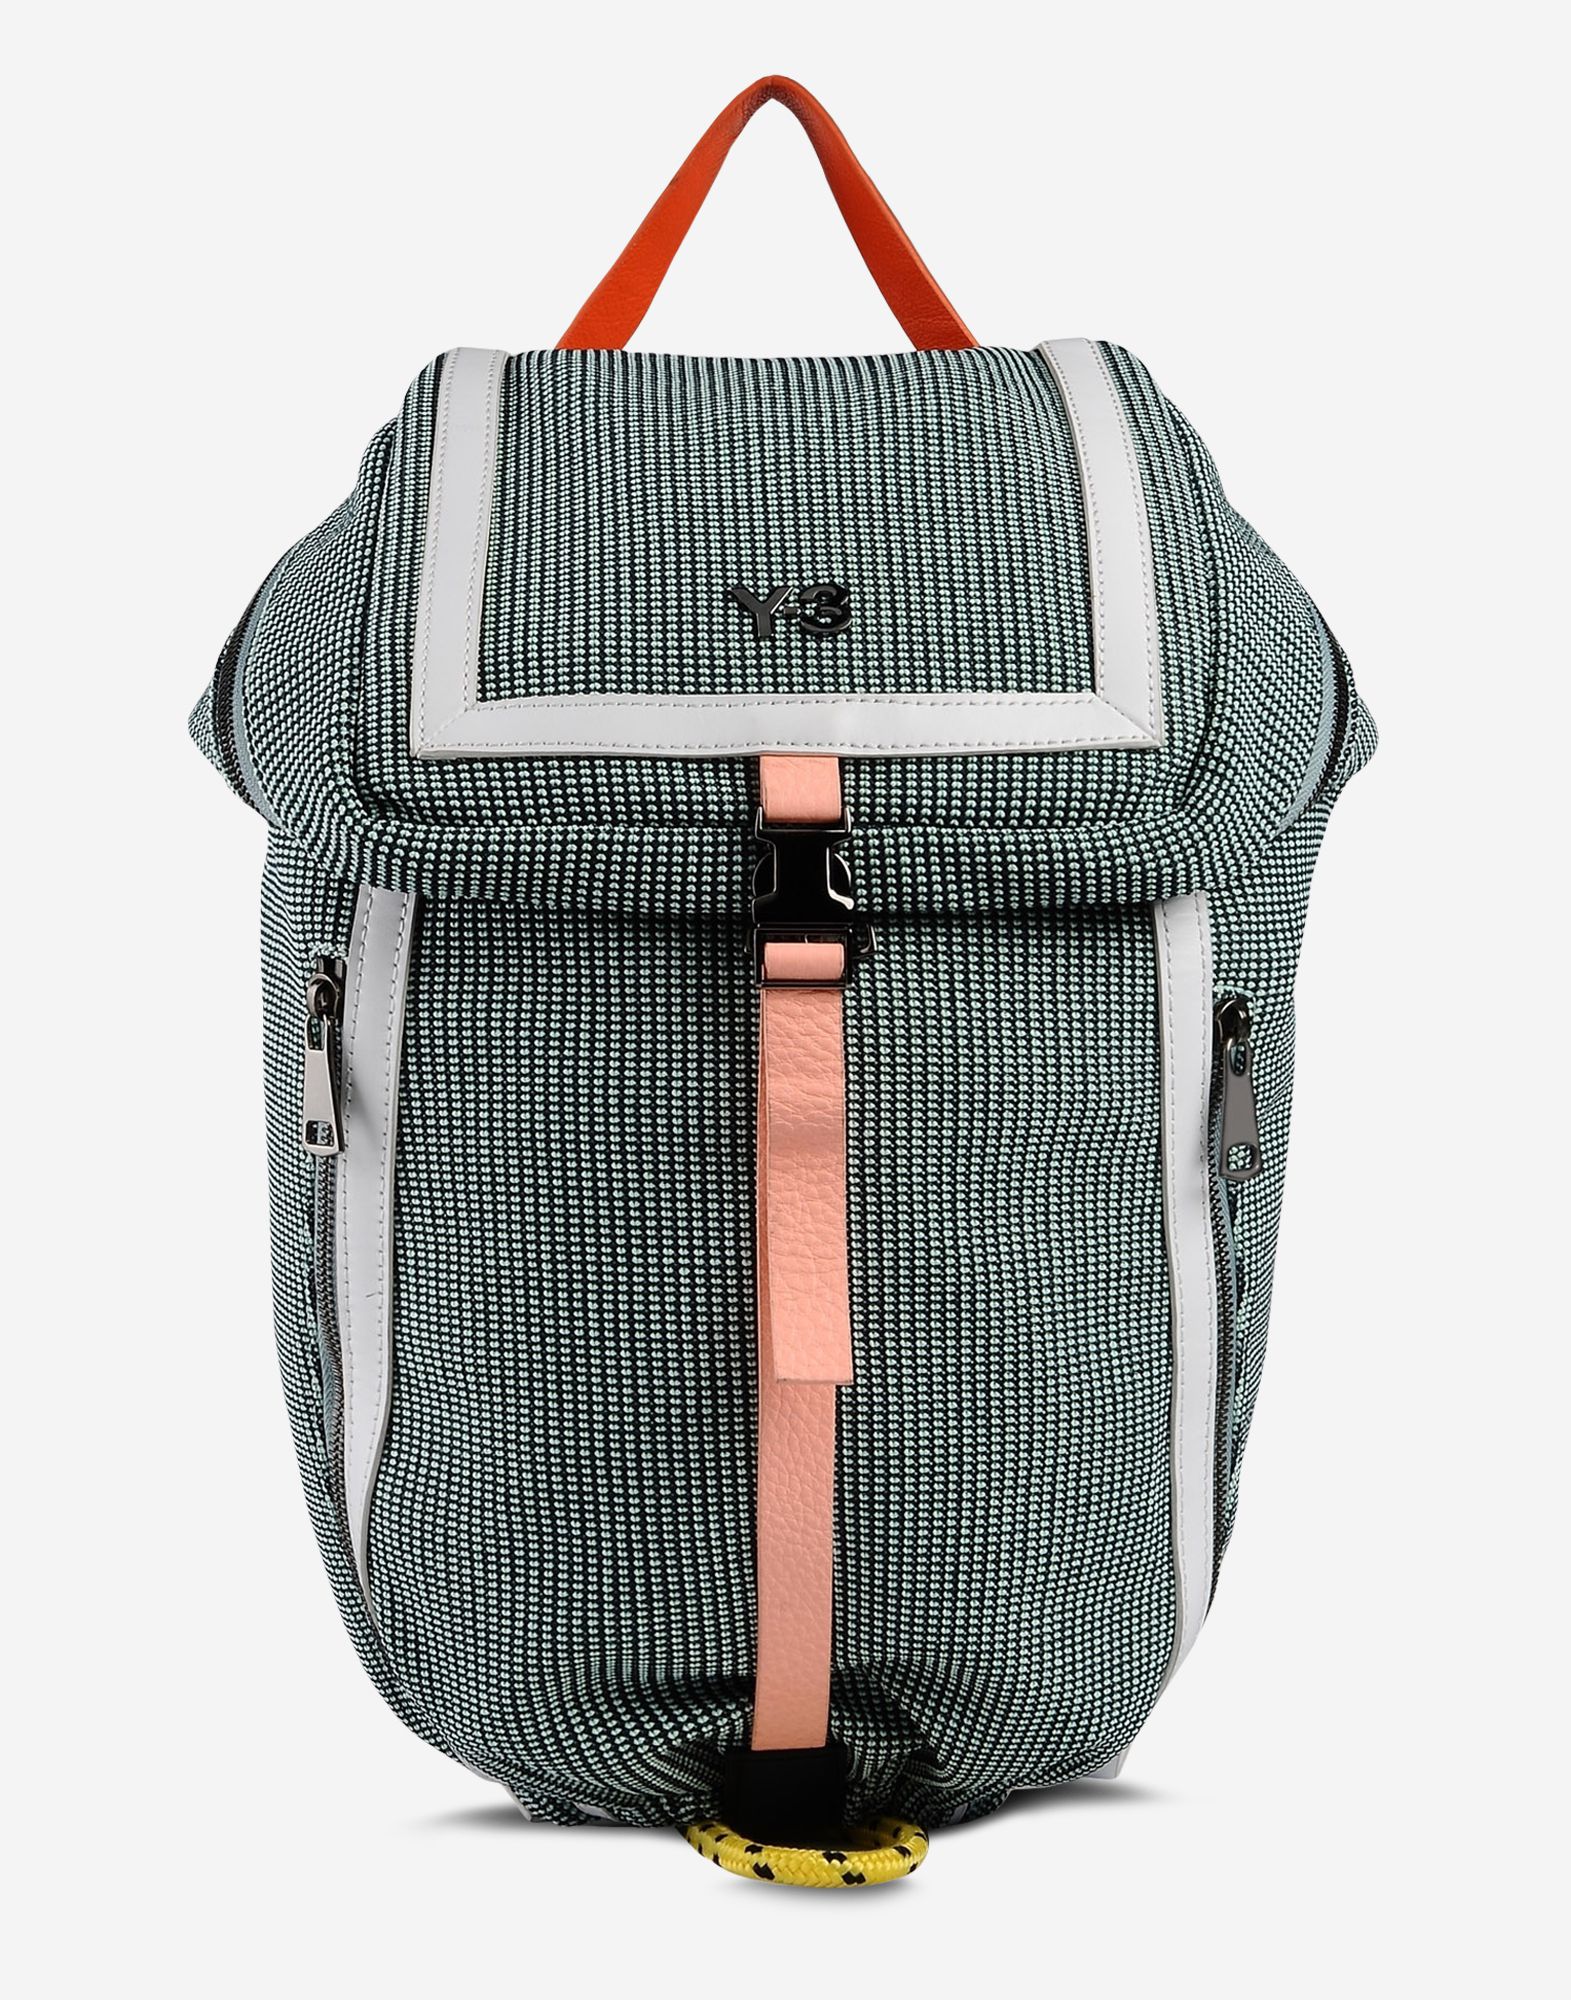 Y 3 Seasonal Backpack for Women | Adidas Y-3 Official Store